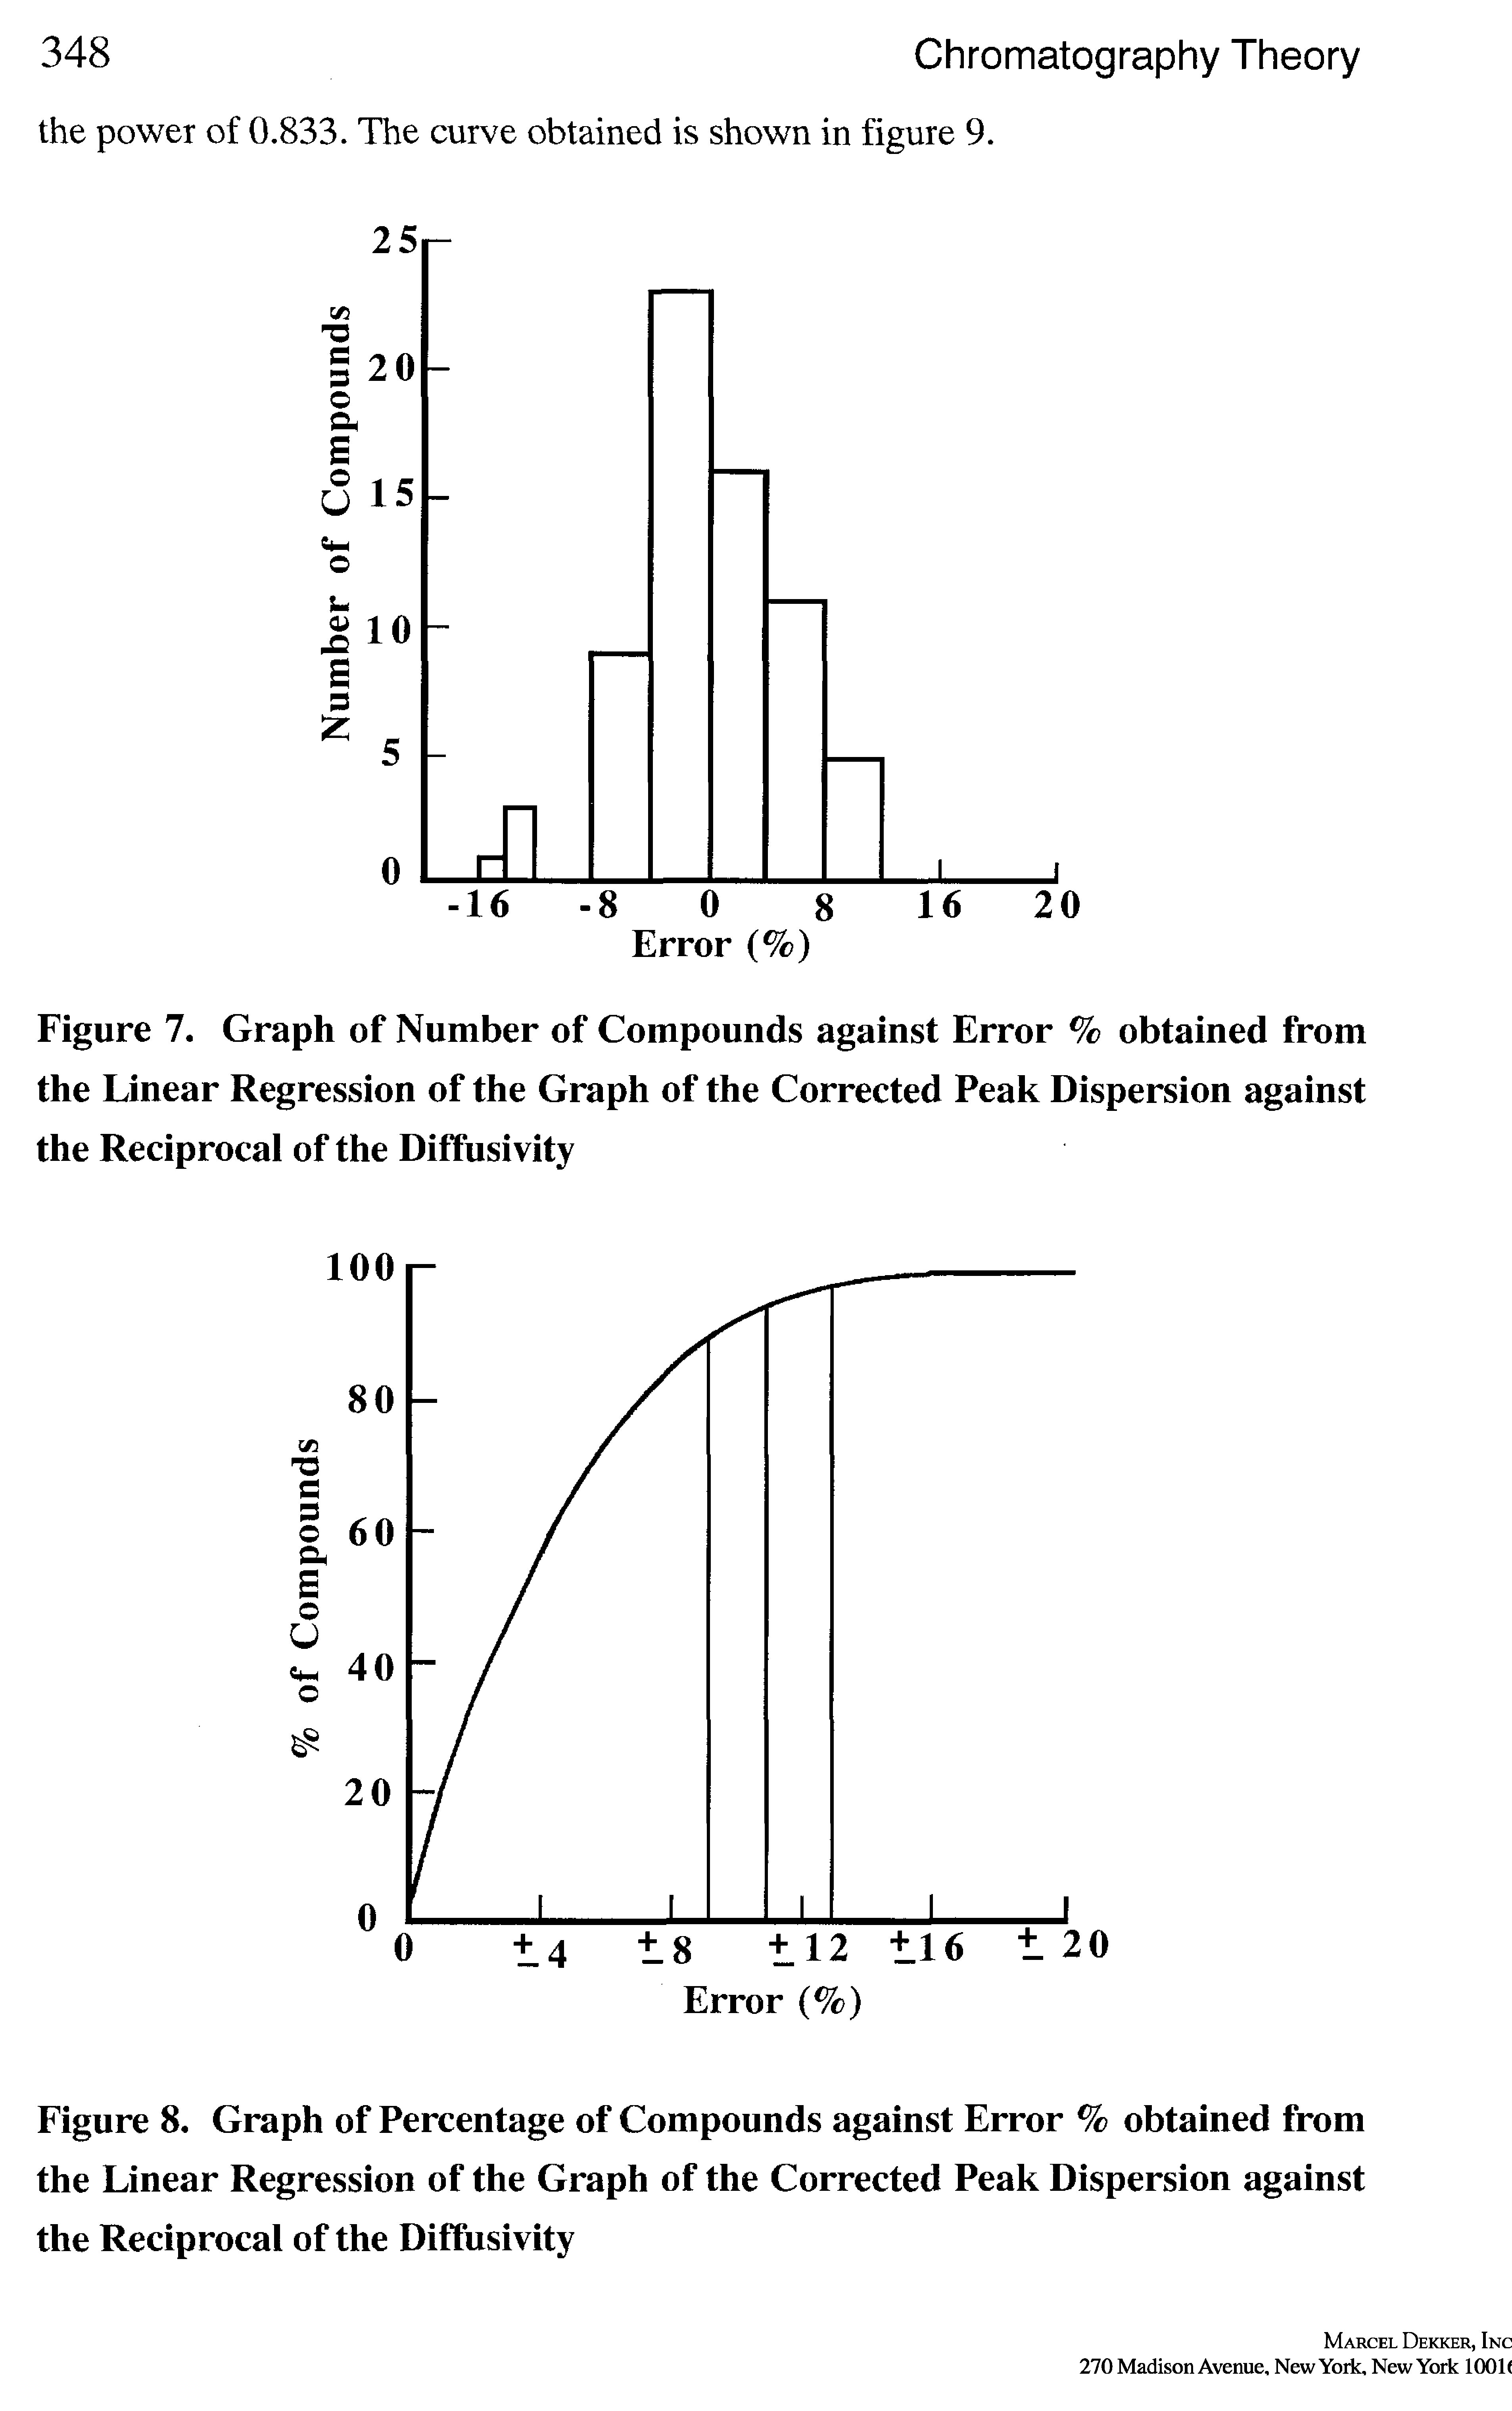 Figure 8, Graph of Percentage of Compounds against Error % obtained from the Linear Regression of the Graph of the Corrected Peak Dispersion against the Reciprocal of the Diffusivity...